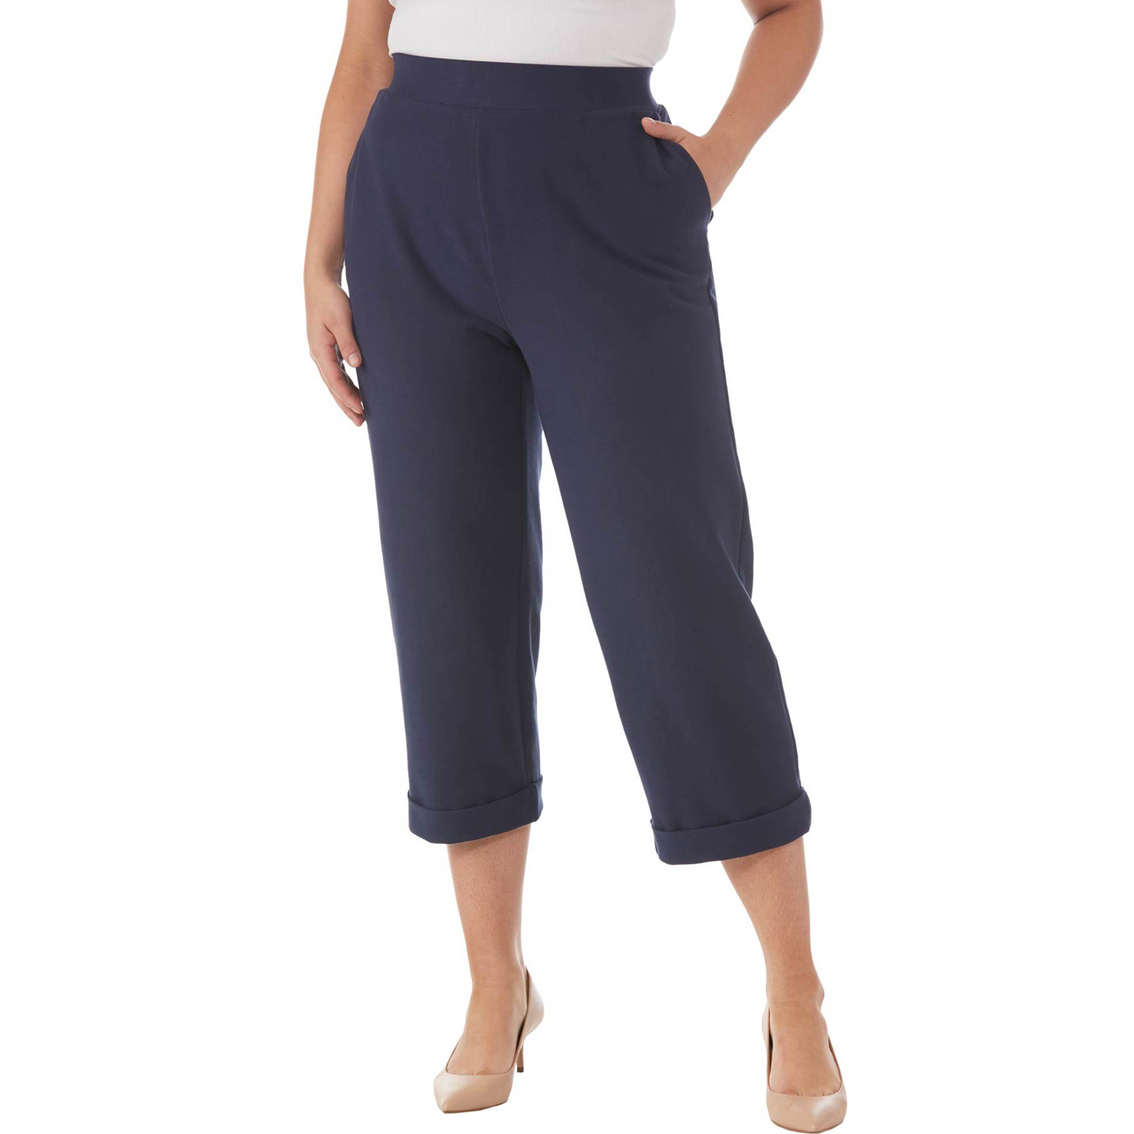 Michael Kors Plus Size Solid Rolled Cuffed Pants | Pants | Clothing ...